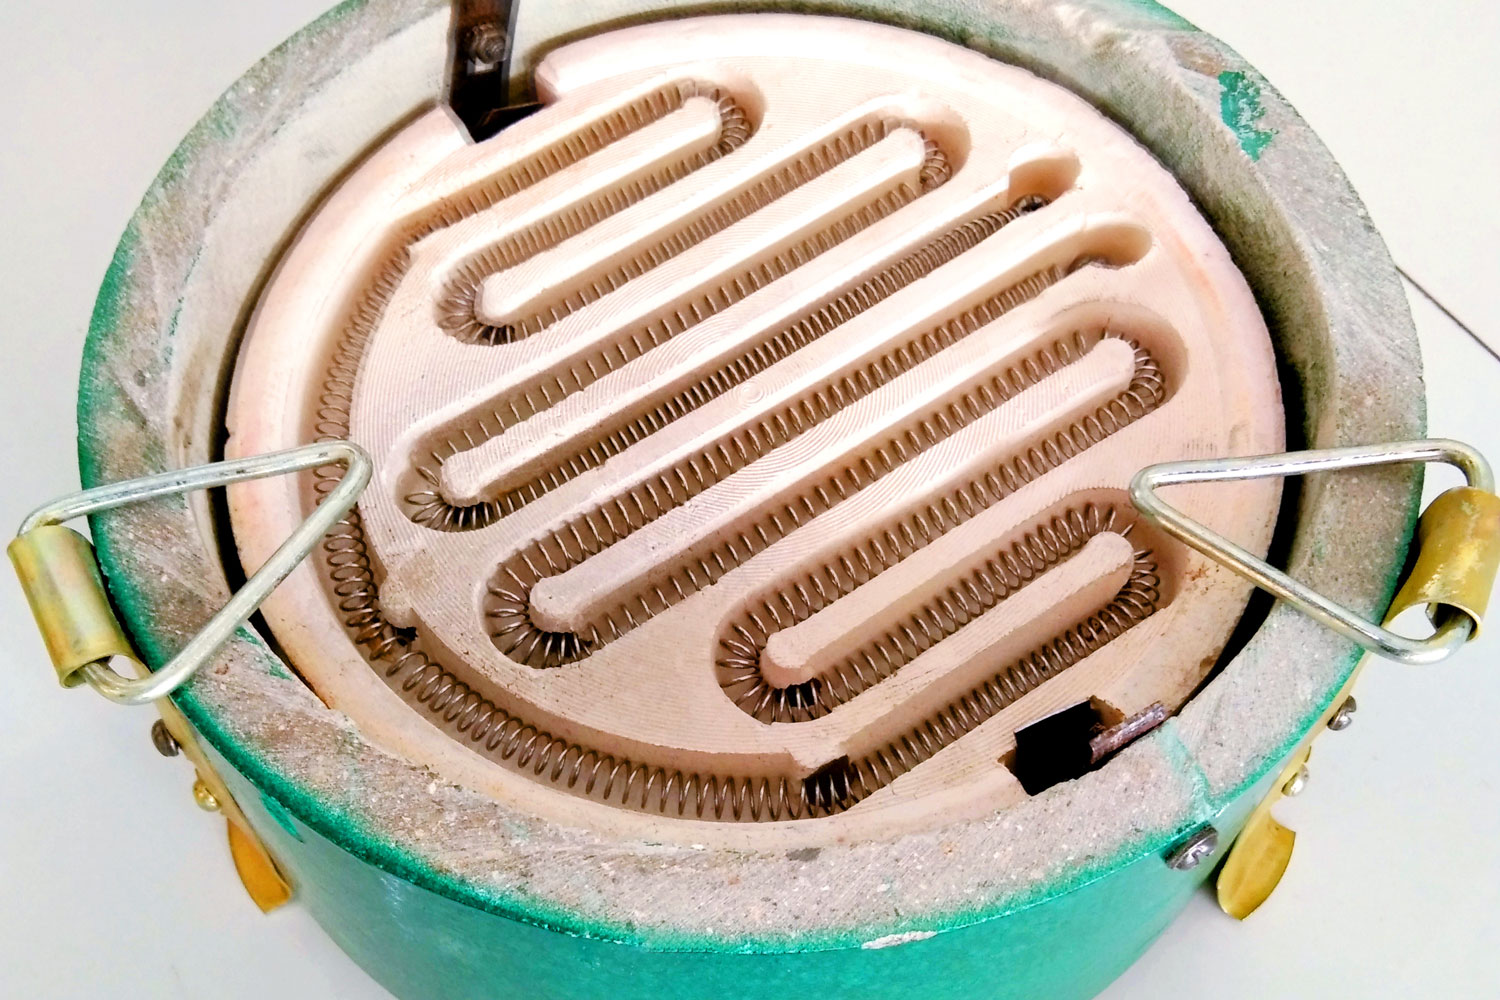 Heated coil might run blow cold if electric coils are worn out